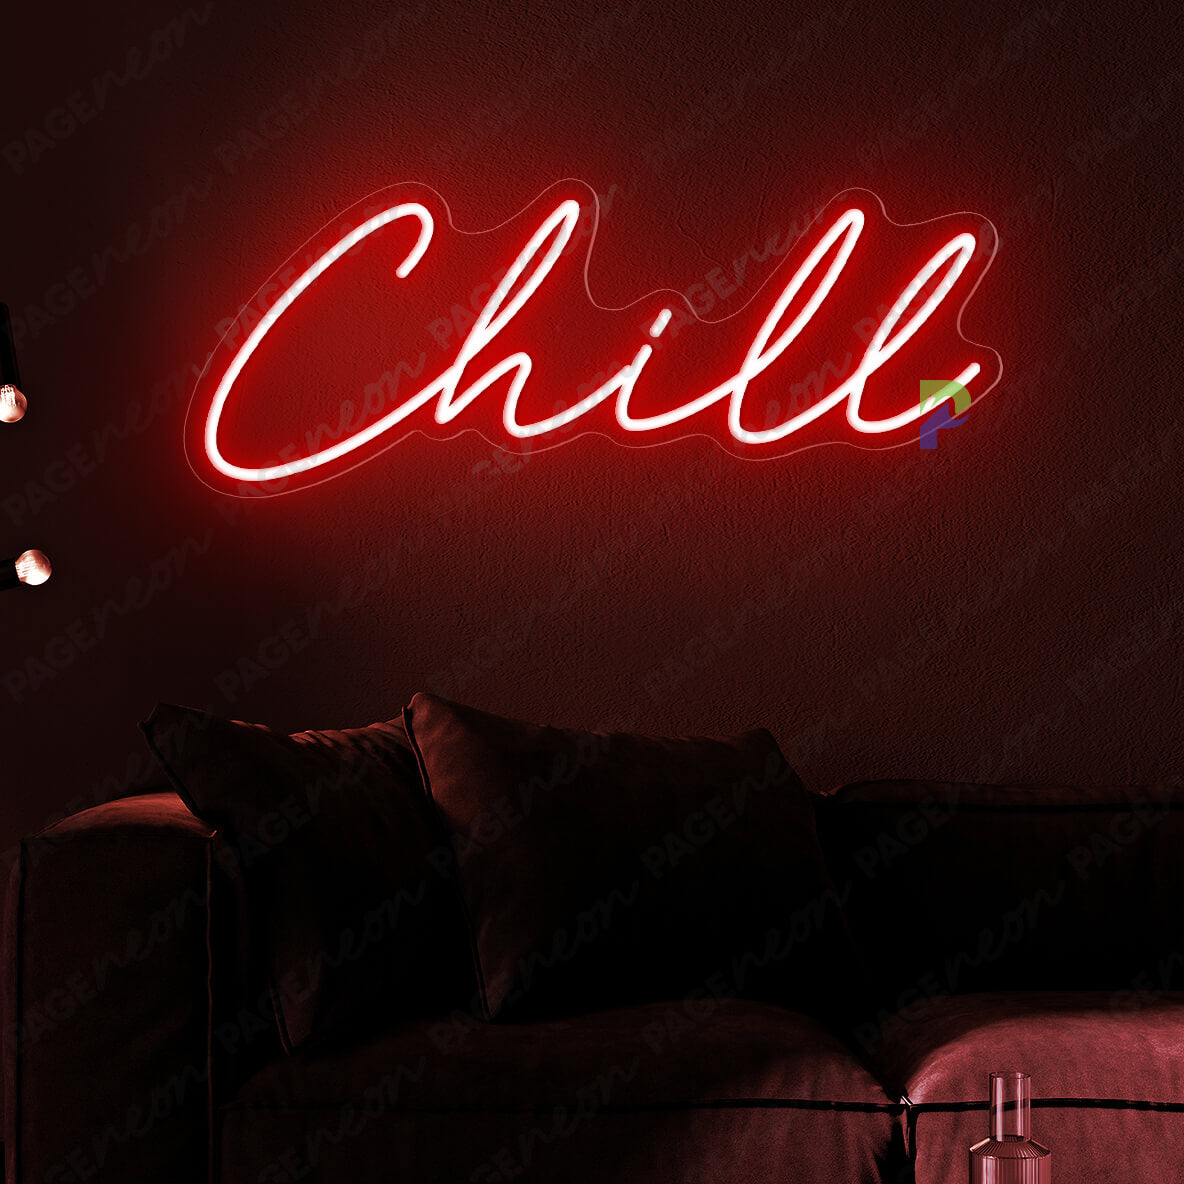 Chill Neon Sign Inspirational Led Light Red